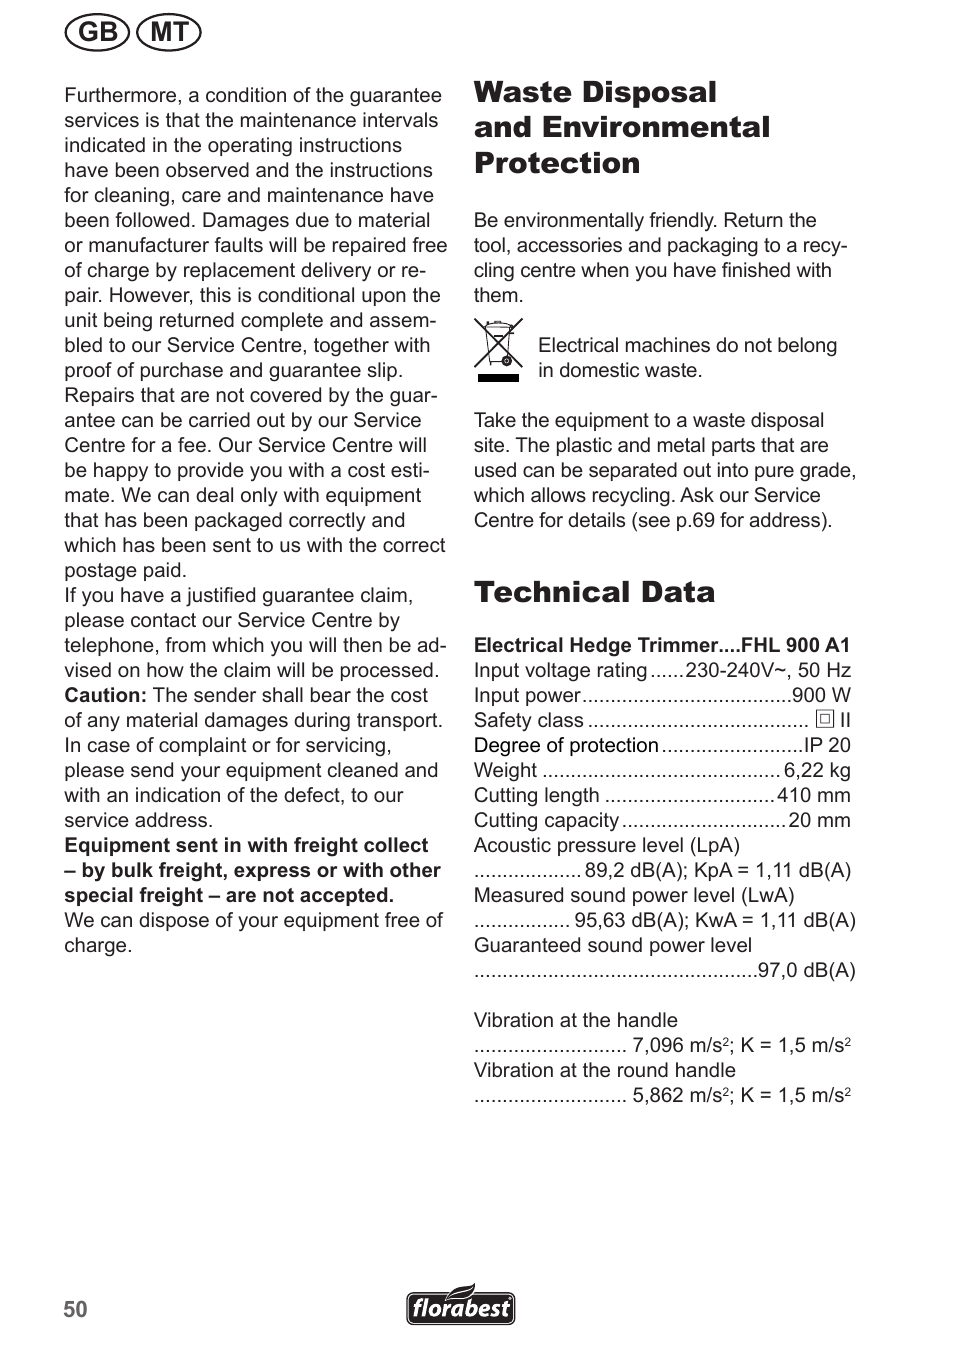 Waste disposal and environmental protection, Technical data, Gb mt | Florabest  FHL 900 A1 User Manual | Page 50 / 70 | Original mode